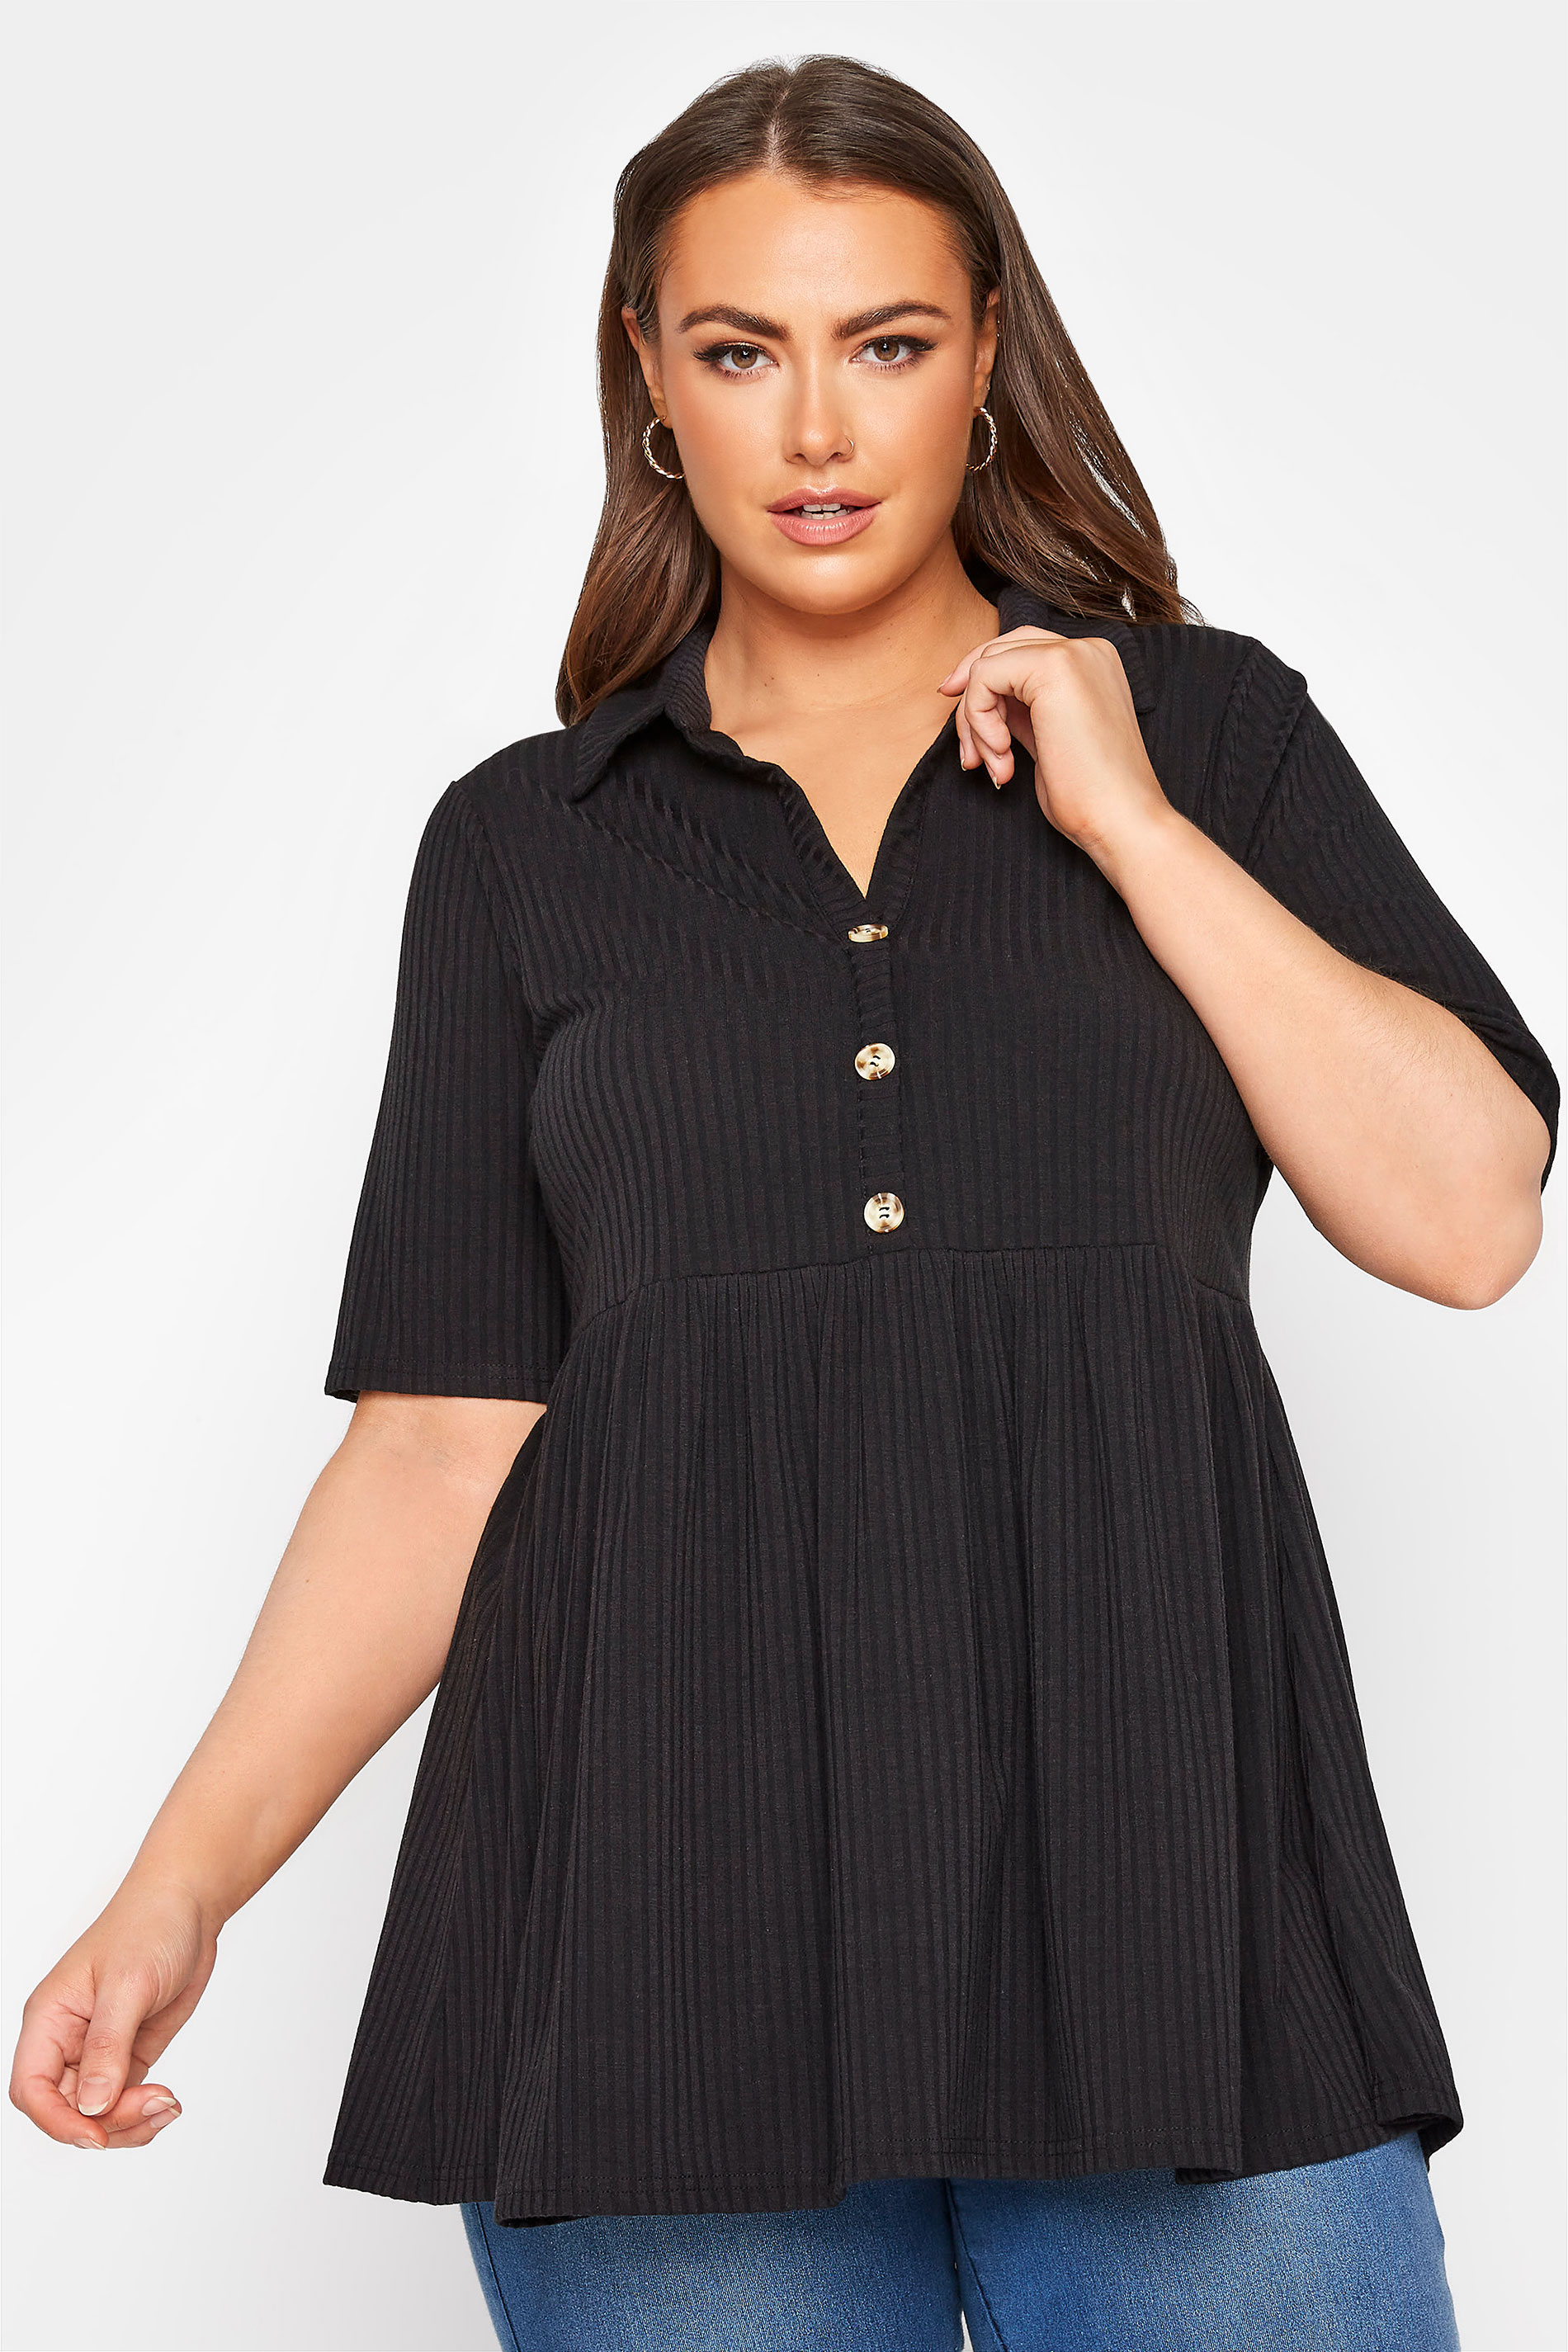 LIMITED COLLECTION Curve Black Ribbed Button Through Peplum Top_A.jpg